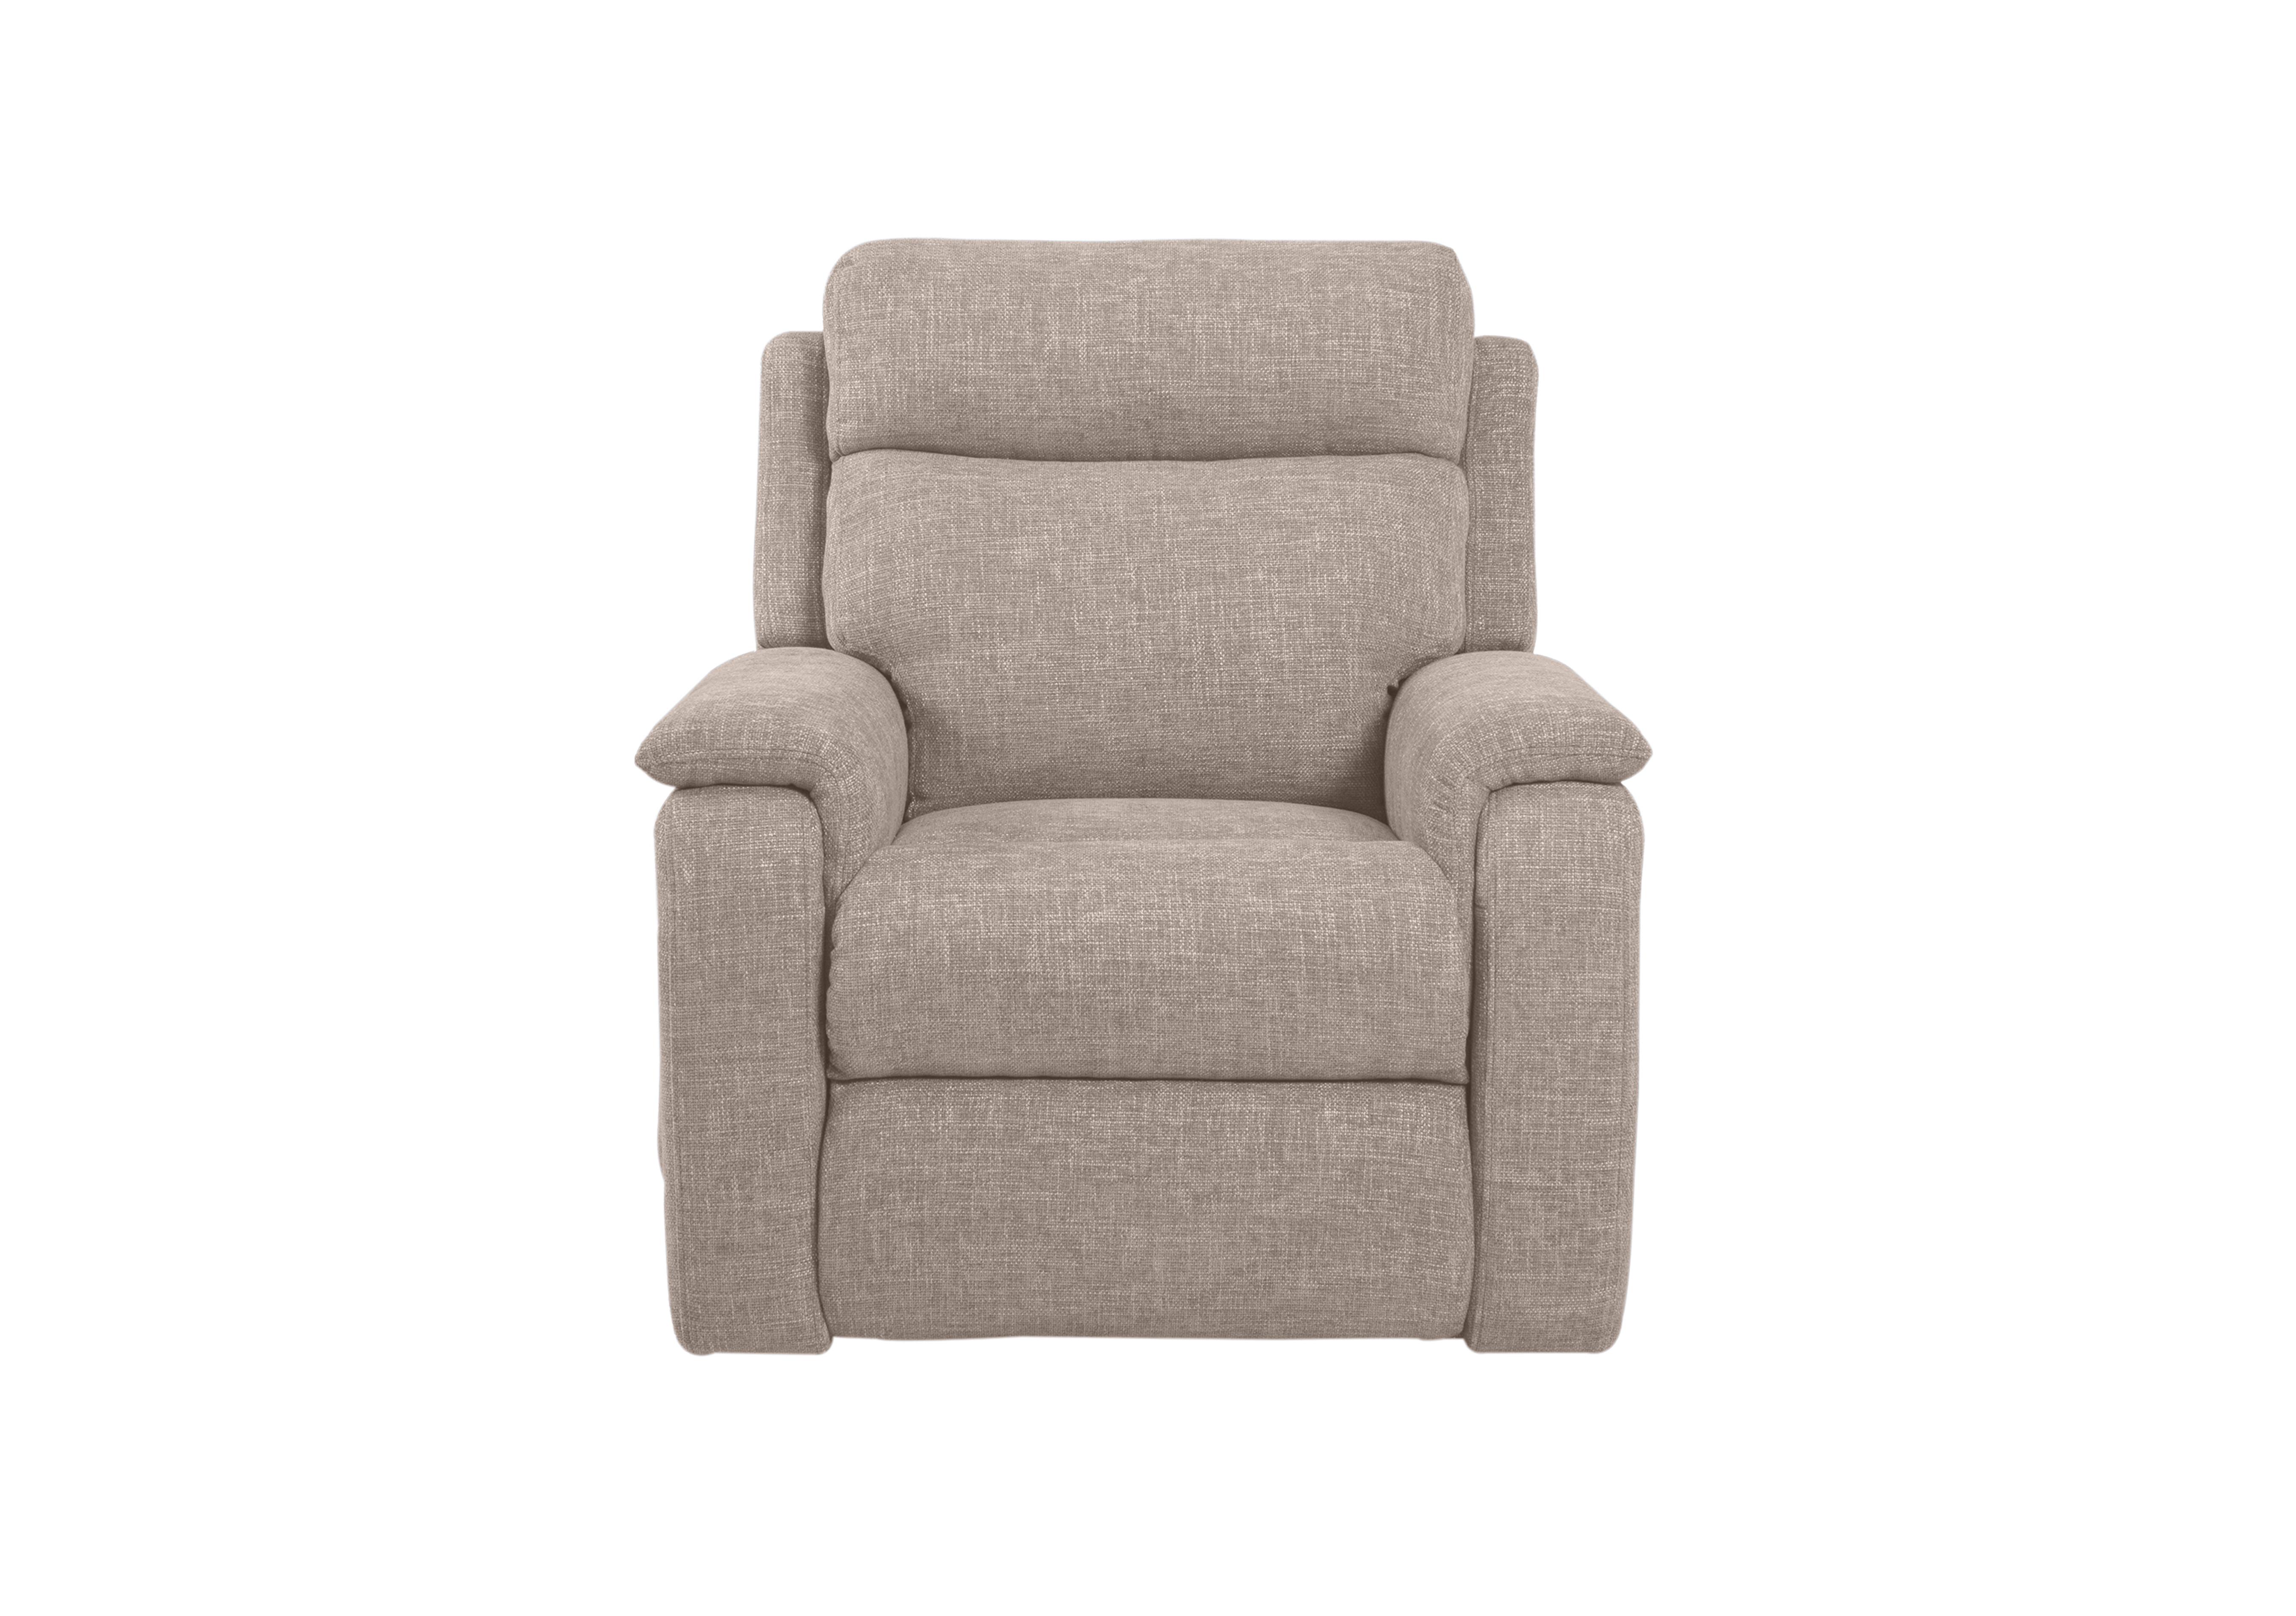 My Chair Kirk Fabric Lift and Rise Chair in 14445 Khaki Anivia 04 on Furniture Village